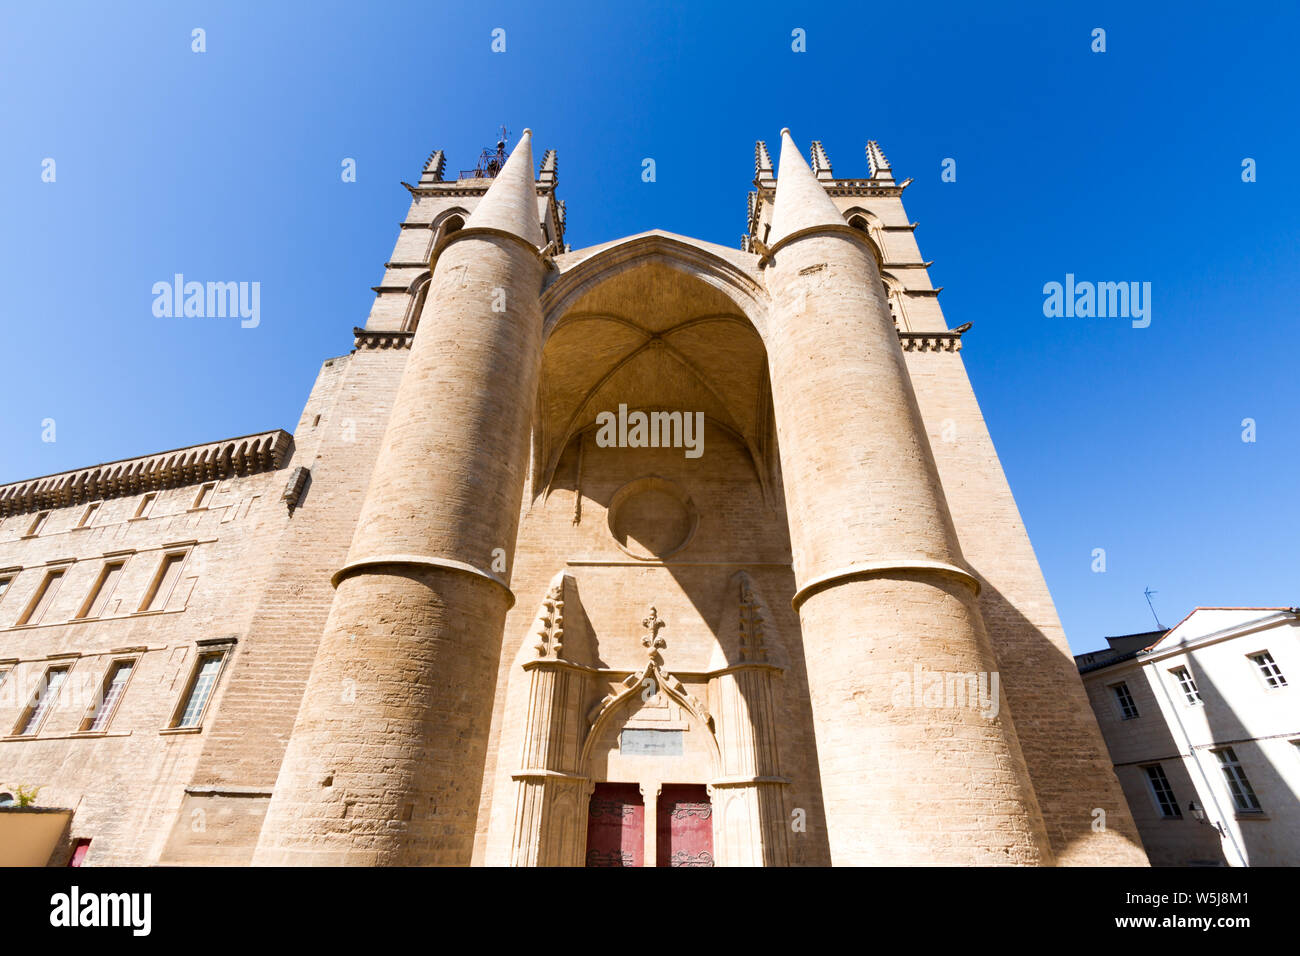 Montpellier Cathedral is a Roman Catholic church located in the city of Montpellier, France. Stock Photo